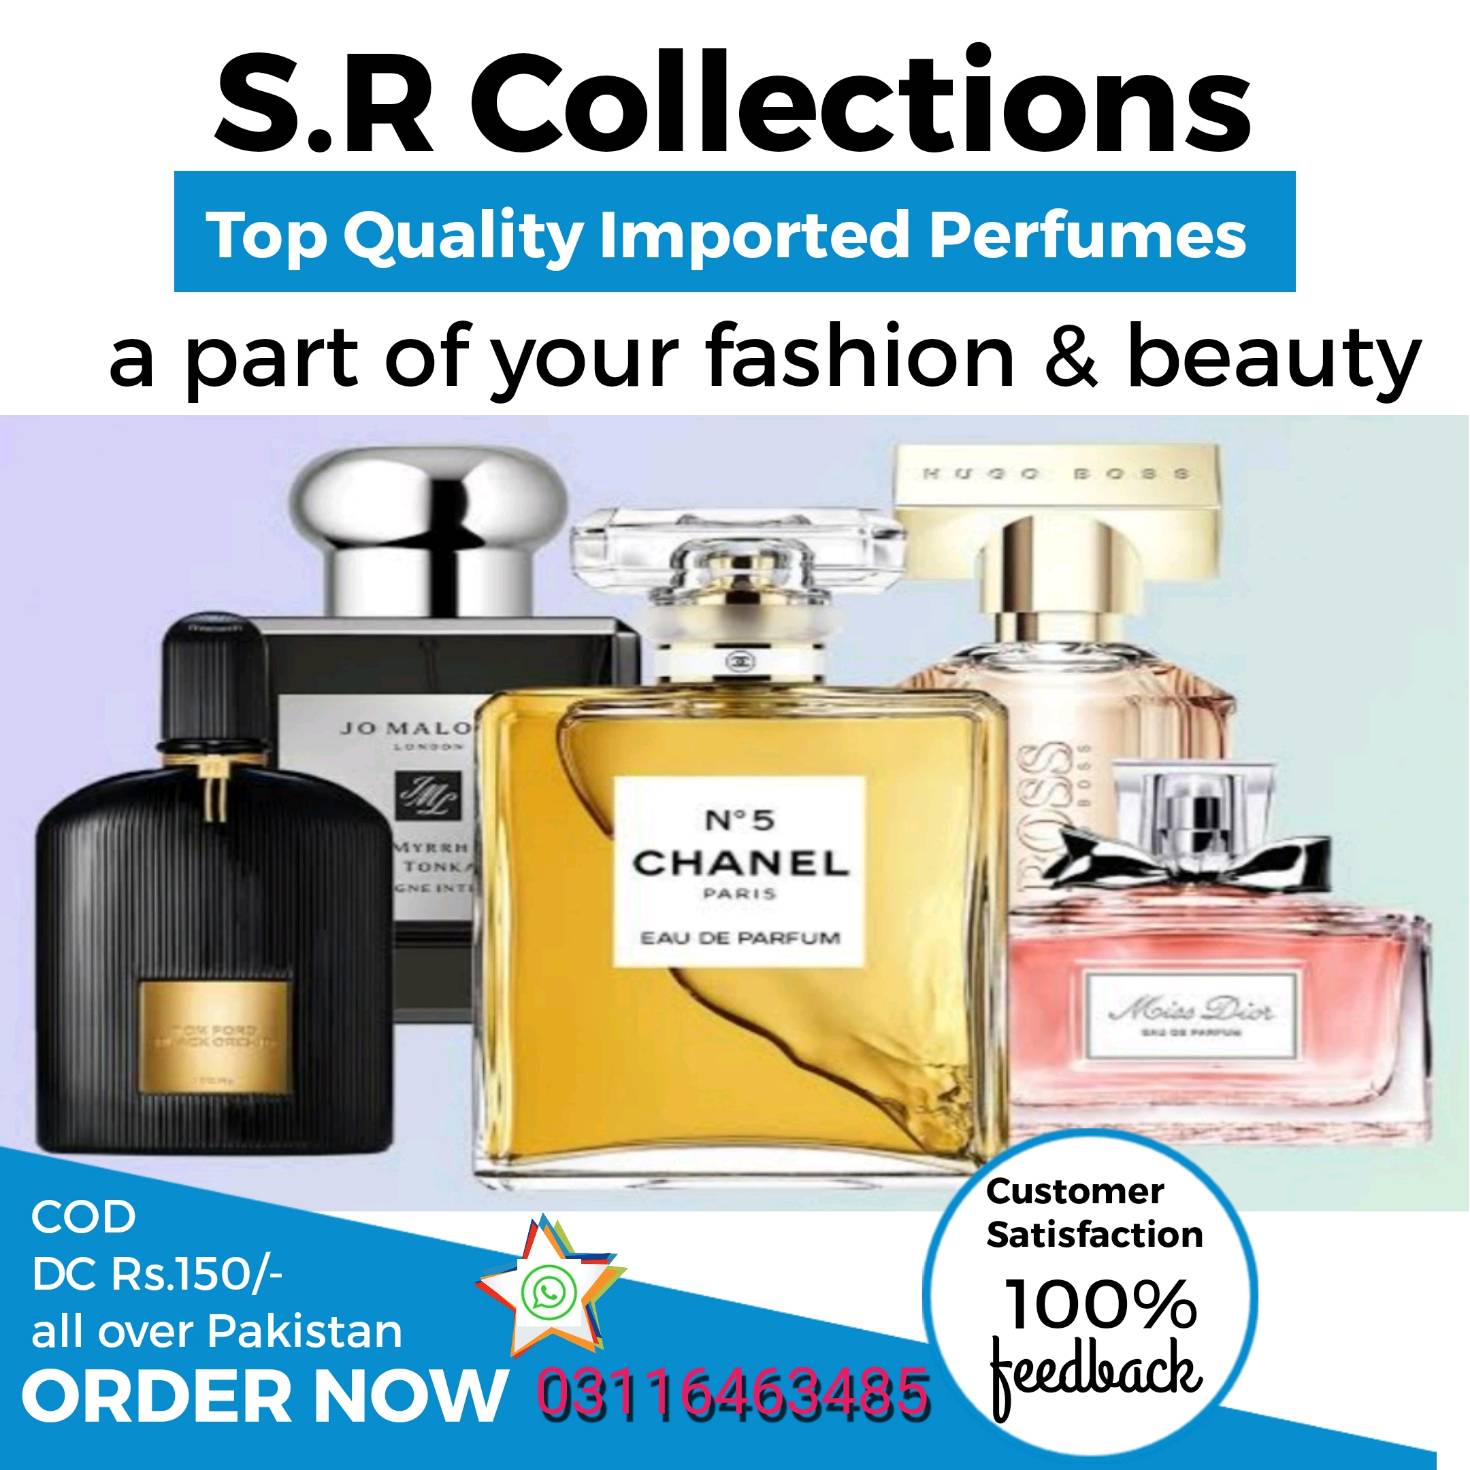 S.R Collections